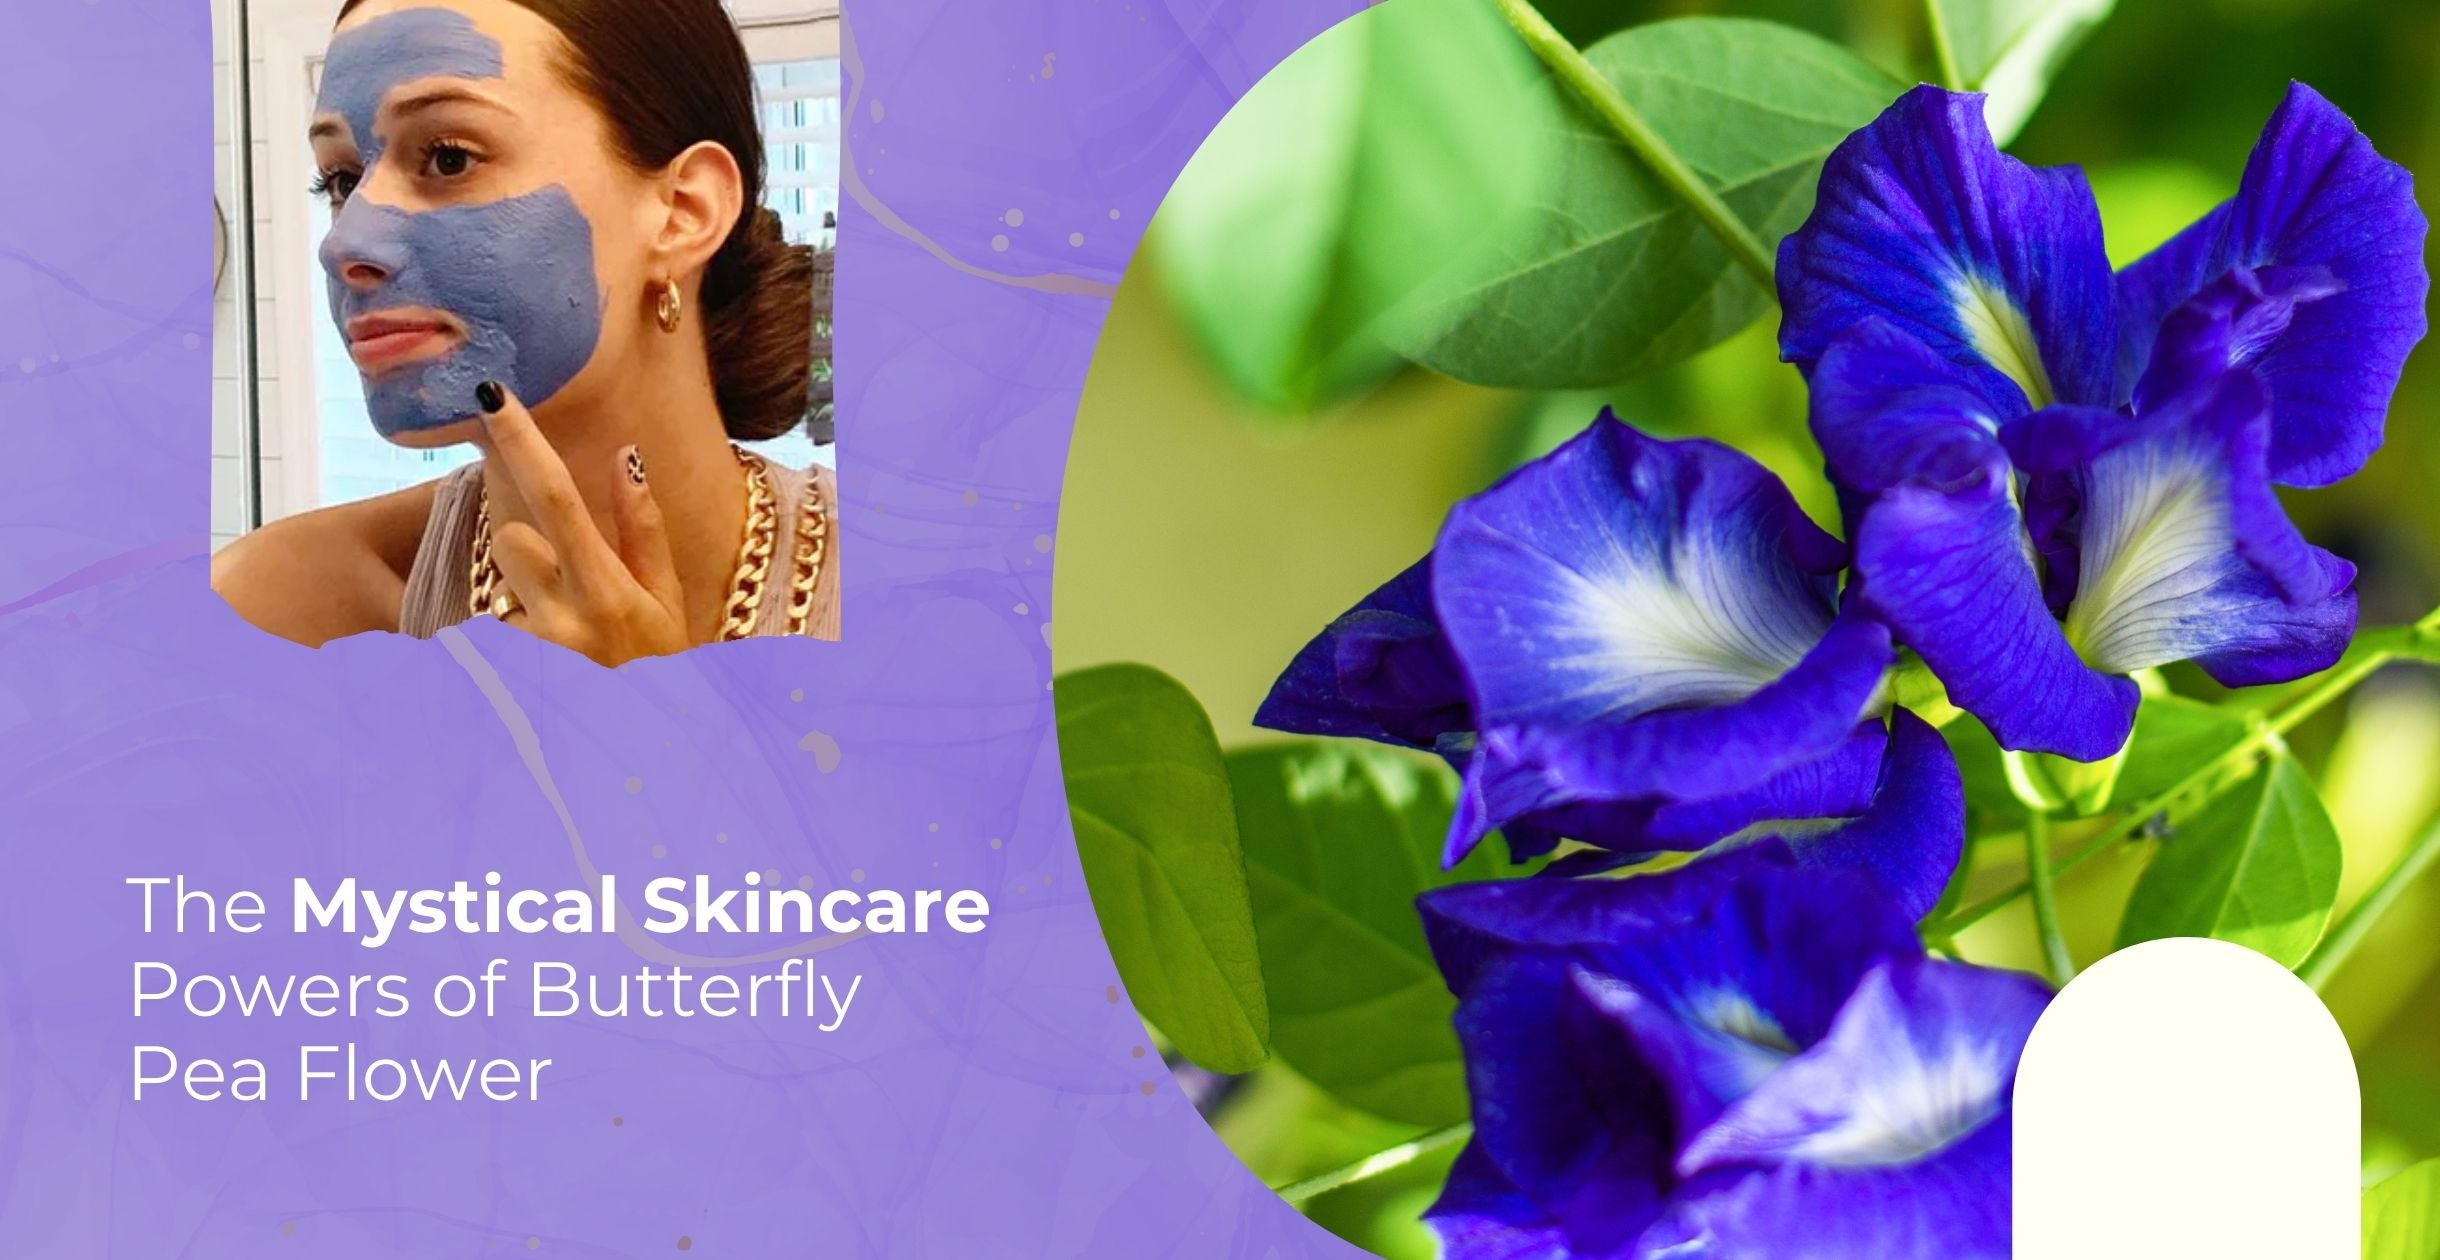 The Mystical Skincare Powers of Butterfly Pea Flower